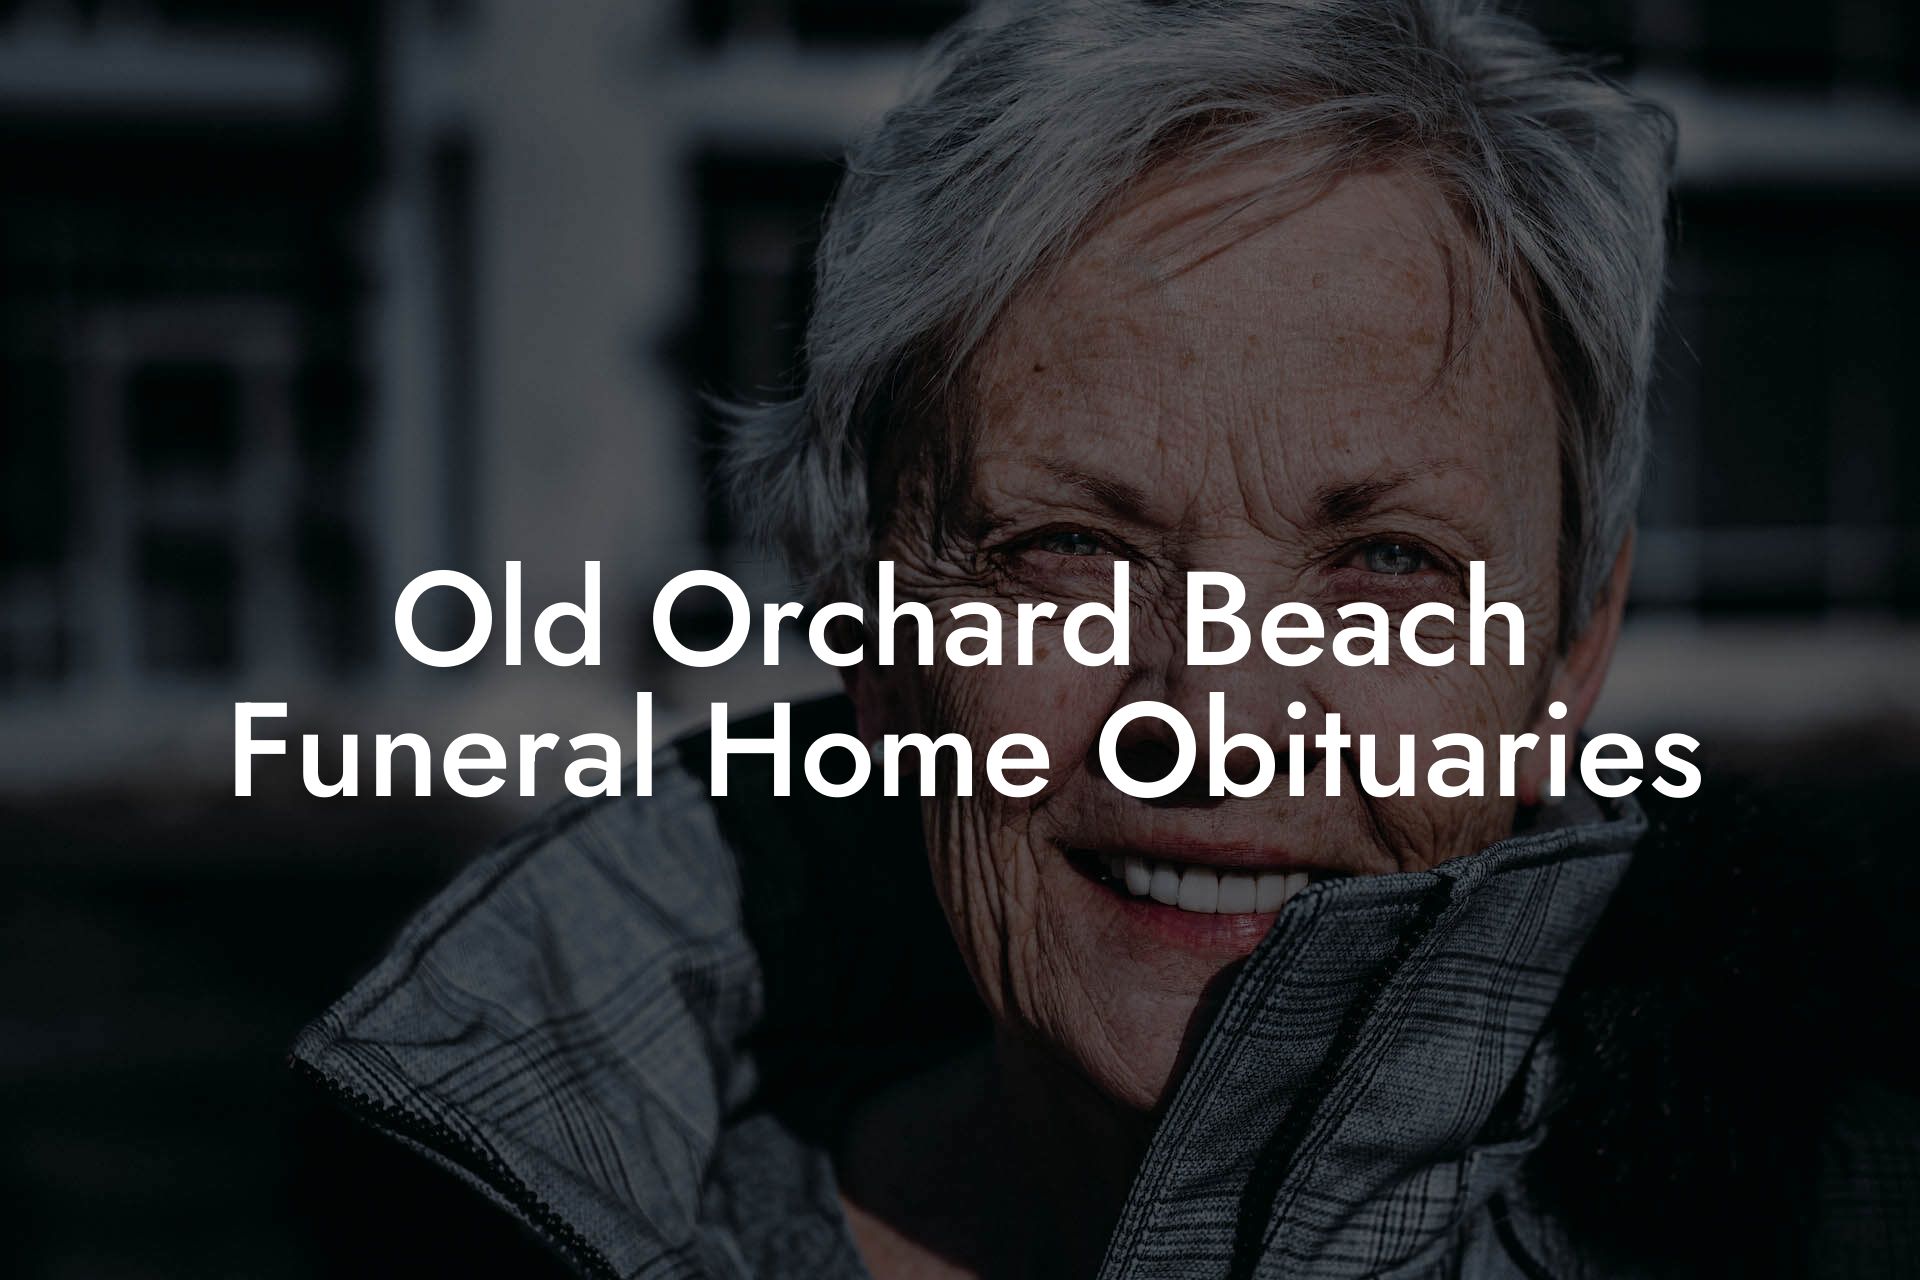 Old Orchard Beach Funeral Home Obituaries